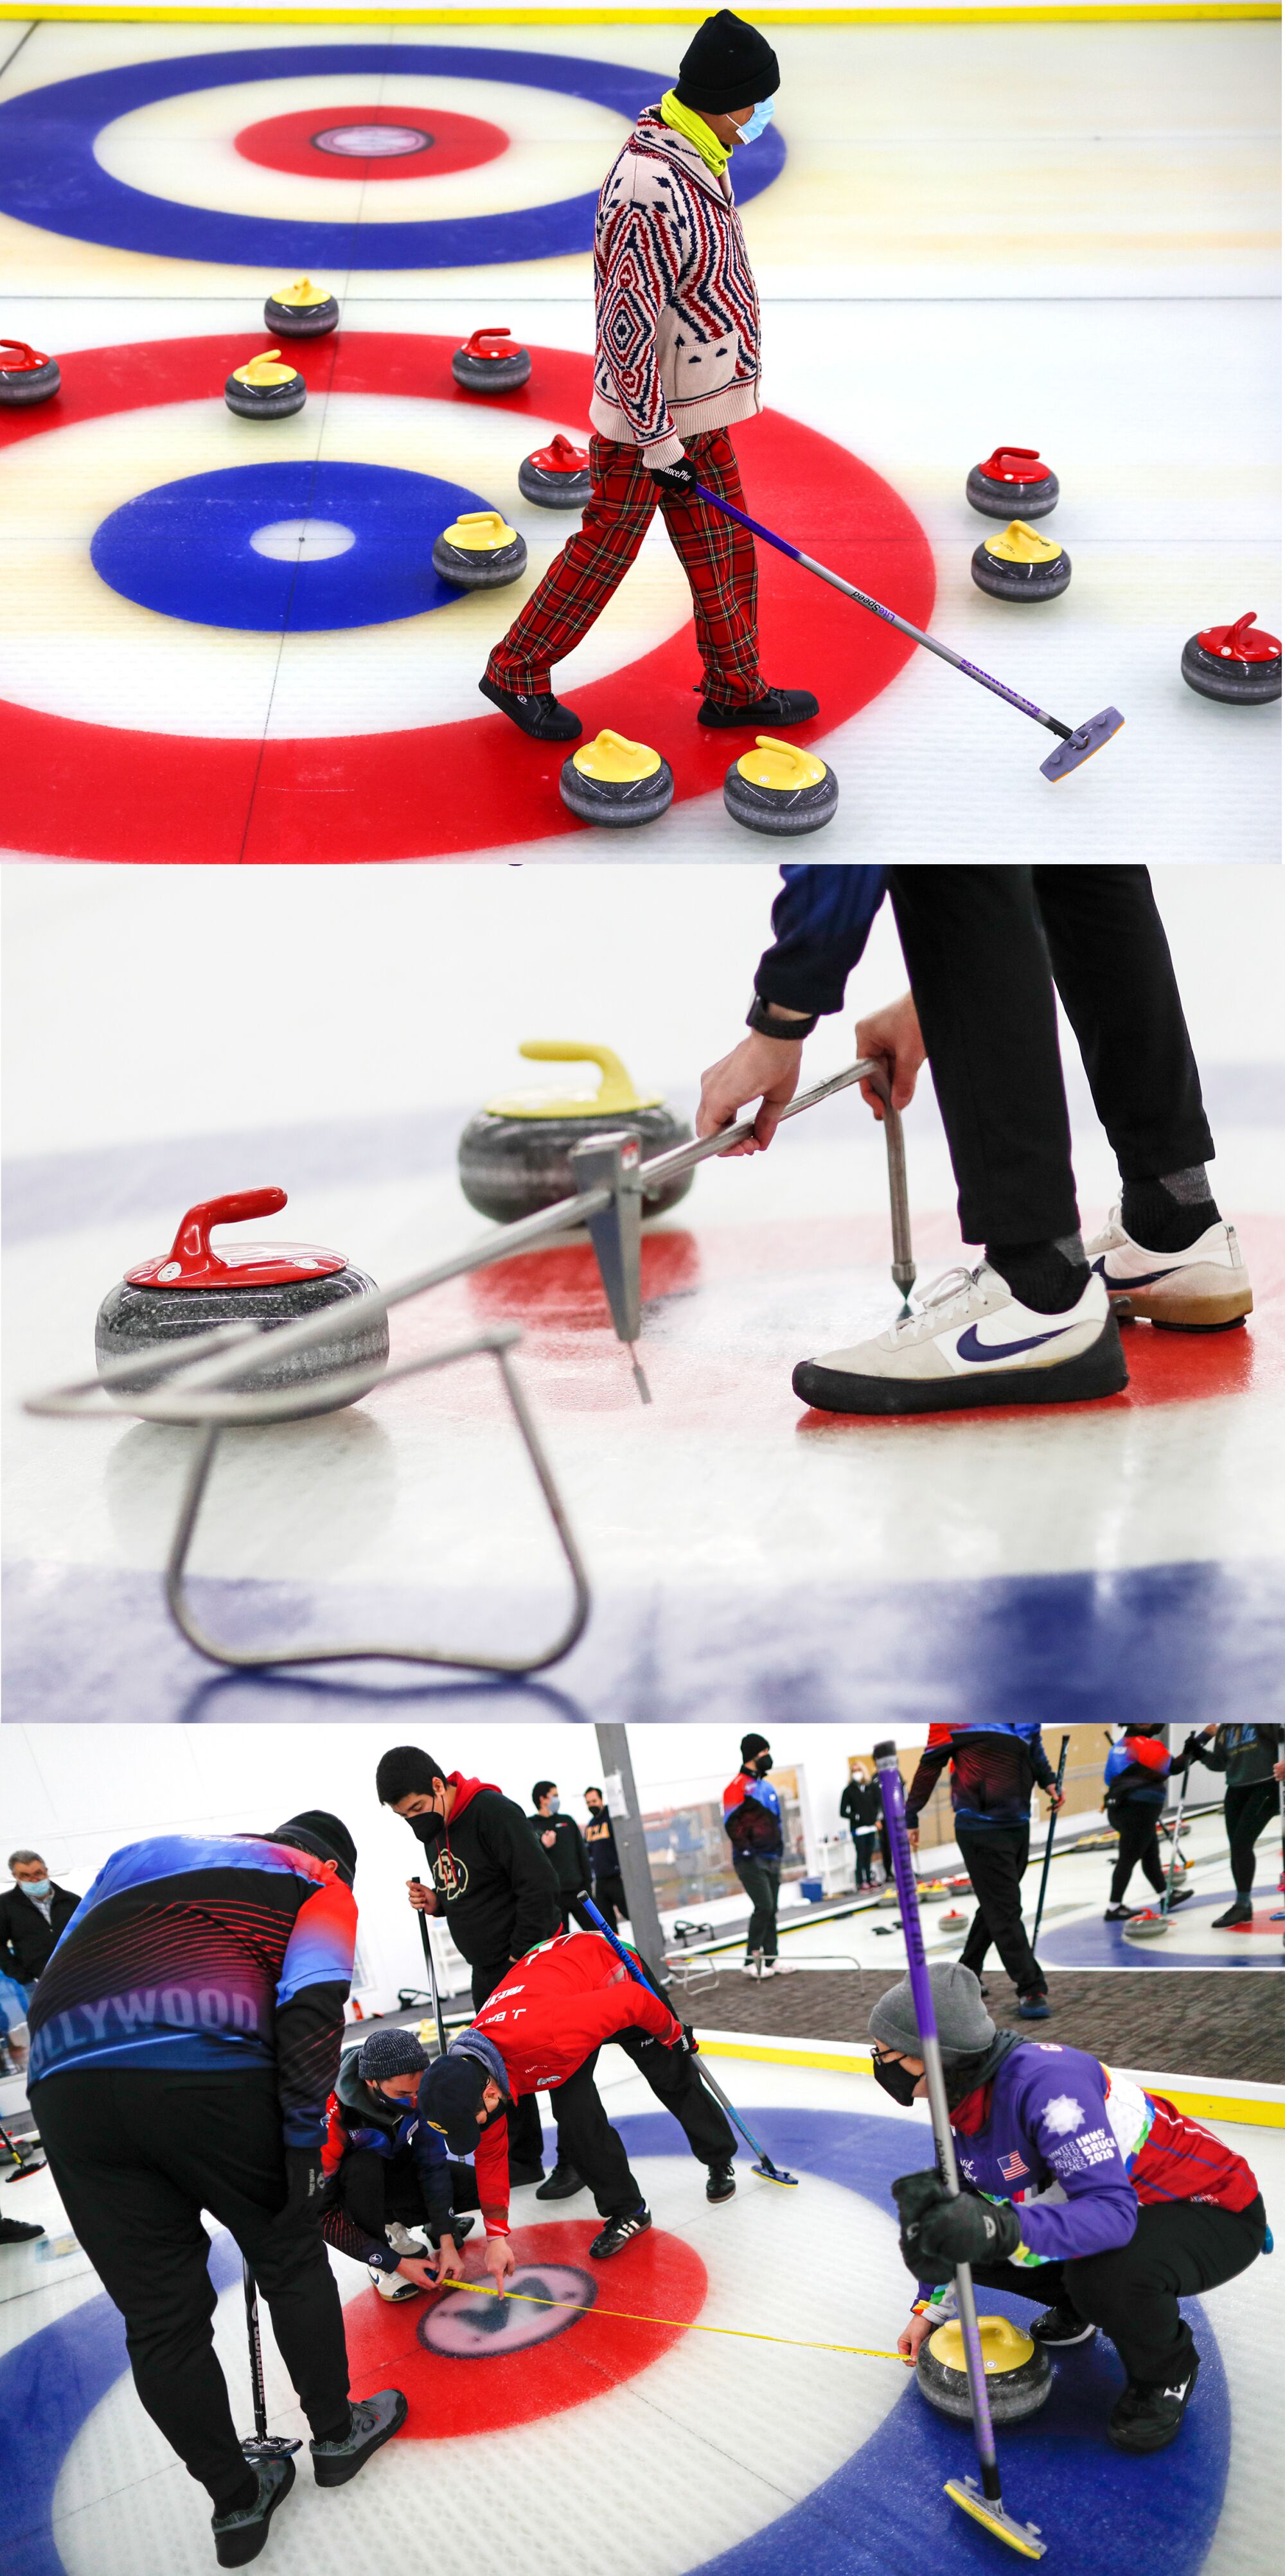 Scenes from Hollywood Curling